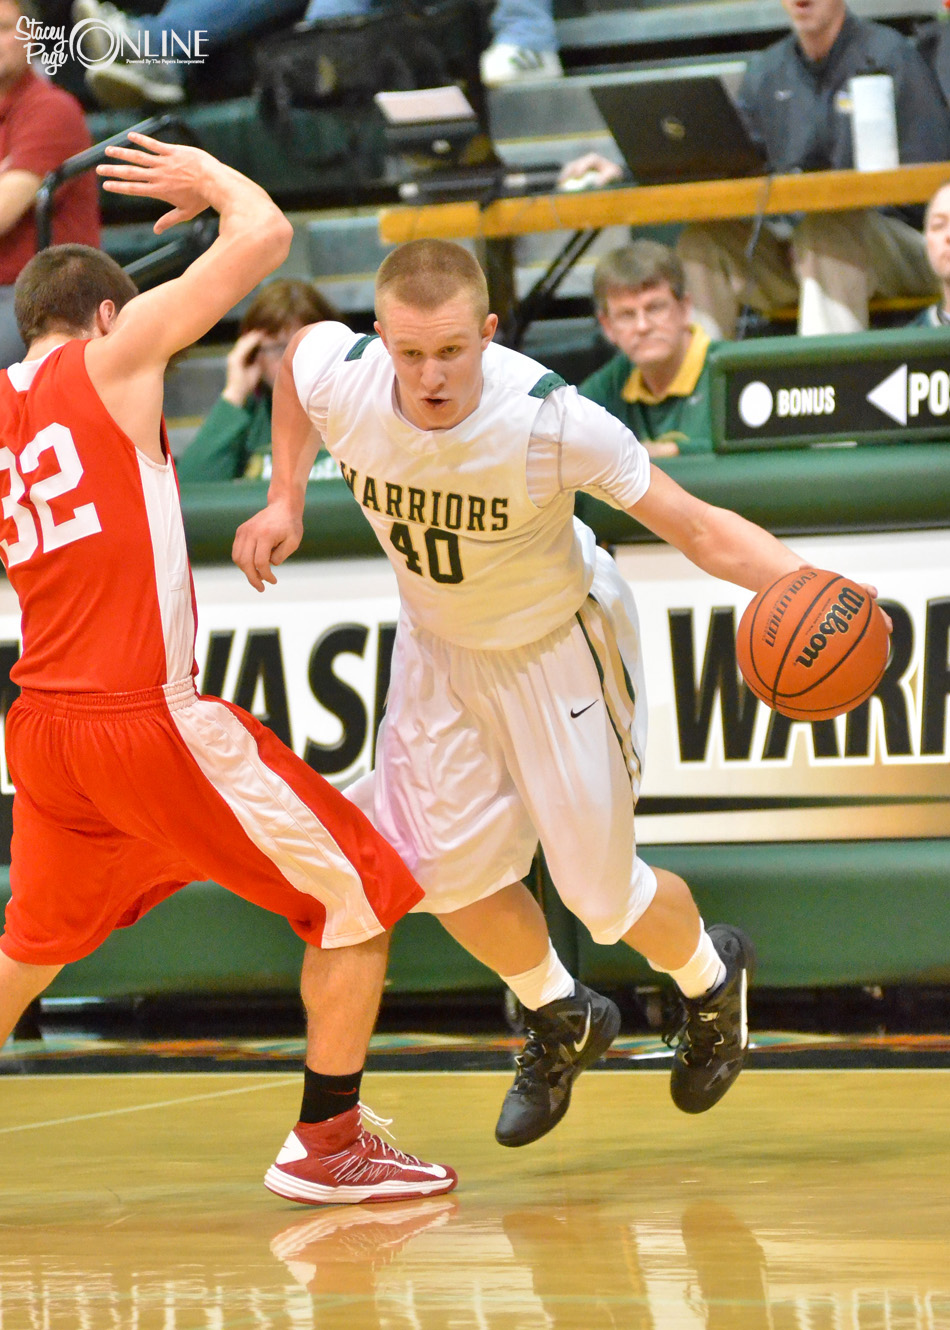 Wawasee's Alex Clark dribbles around Plymouth's Kyser McCrammer Friday night. The game was overshadowed by the news Wawasee student KC Ochs had committed suicide earlier in the day, sombering the atmosphere surrounding the contest.